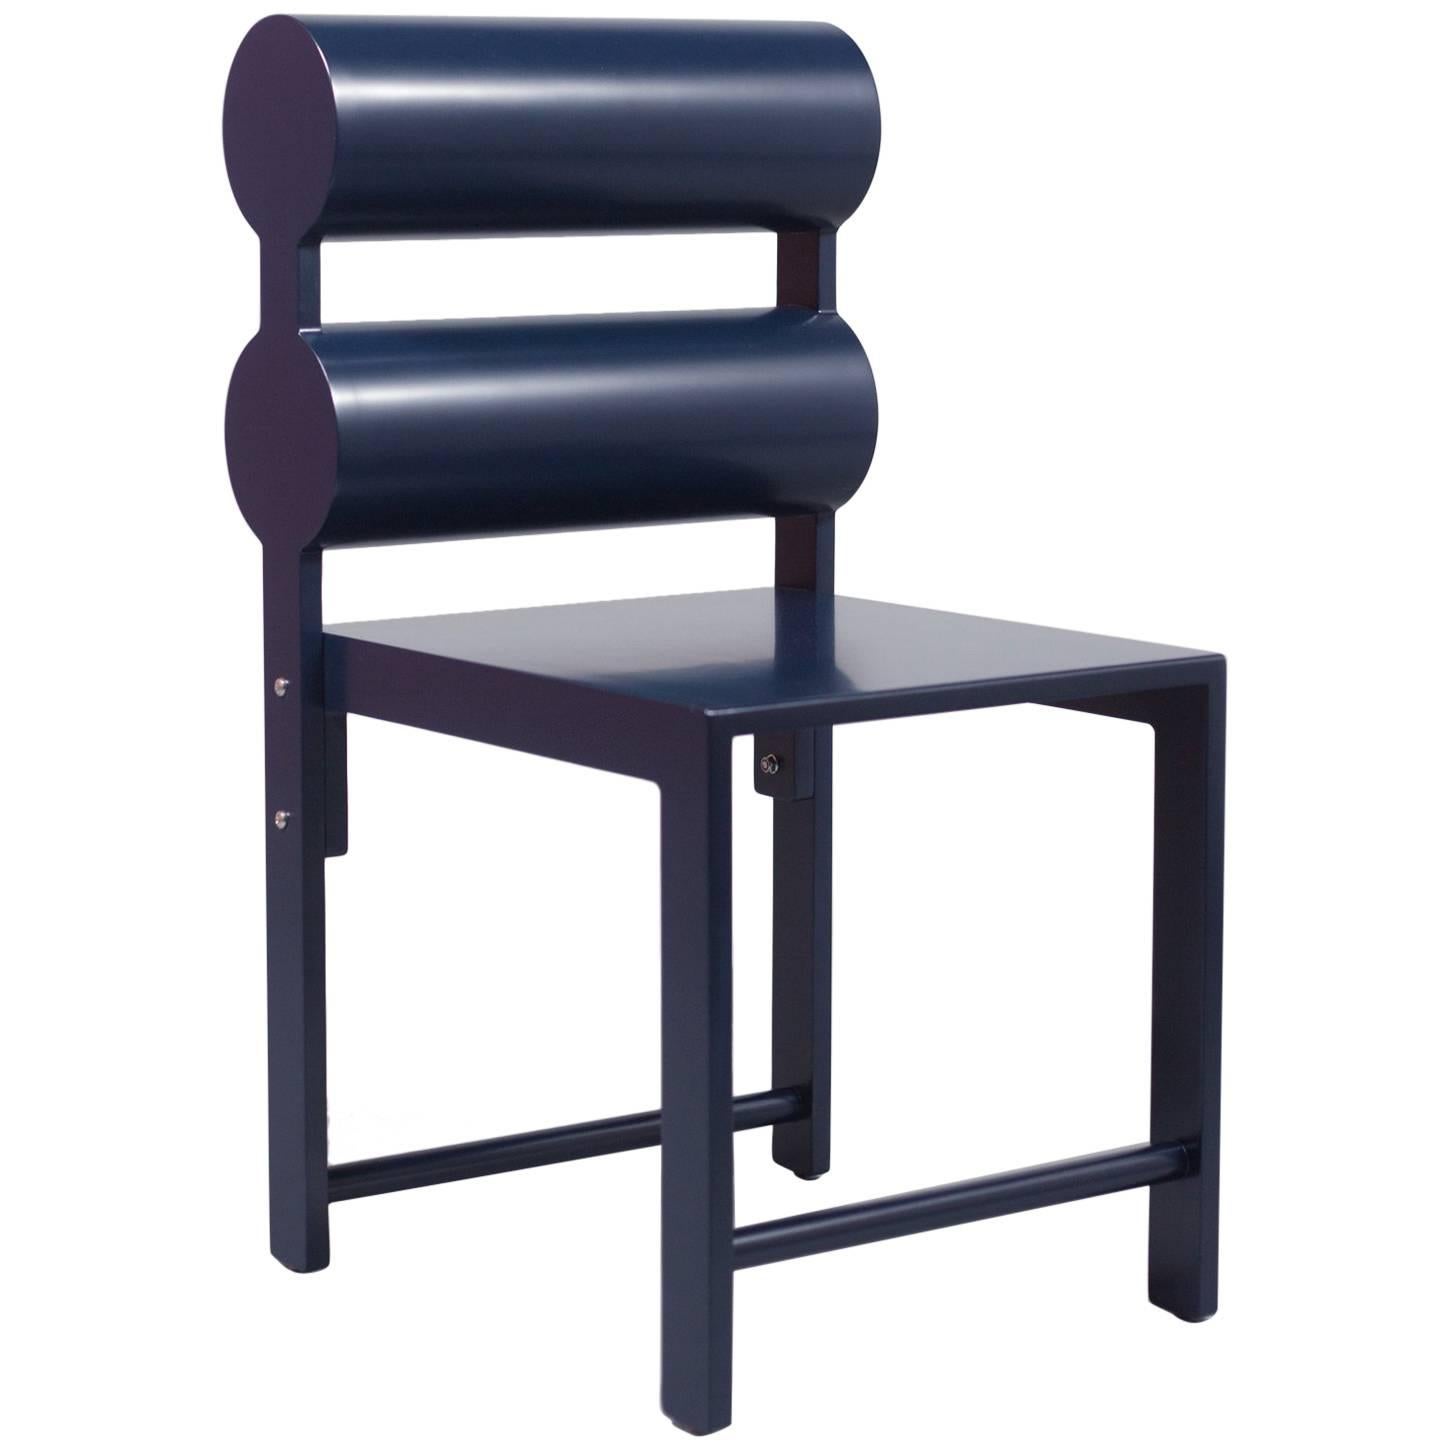 Waka Waka Contemporary Indigo Blue Lacquer Double Cylinder Dining Chair For Sale